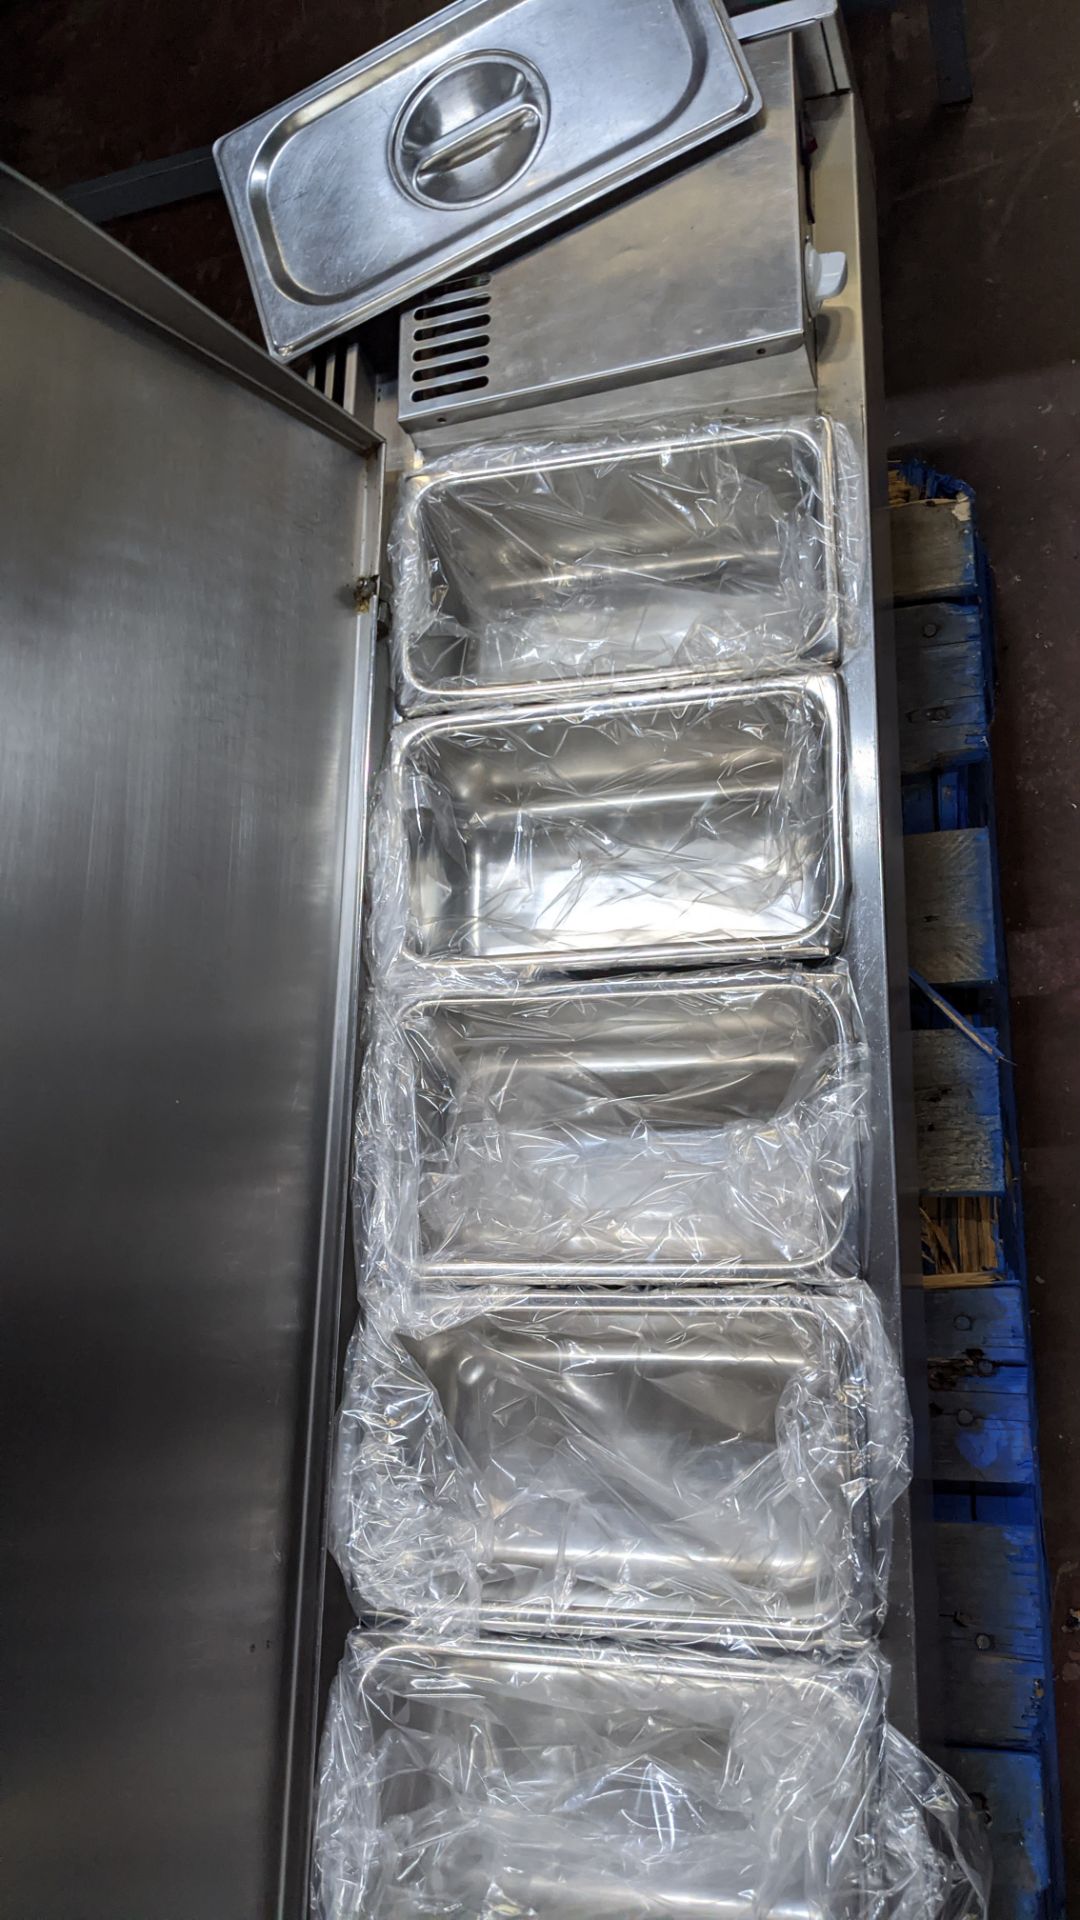 Large stainless steel countertop saladette unit including what appear to be brand new trays for use - Image 4 of 7